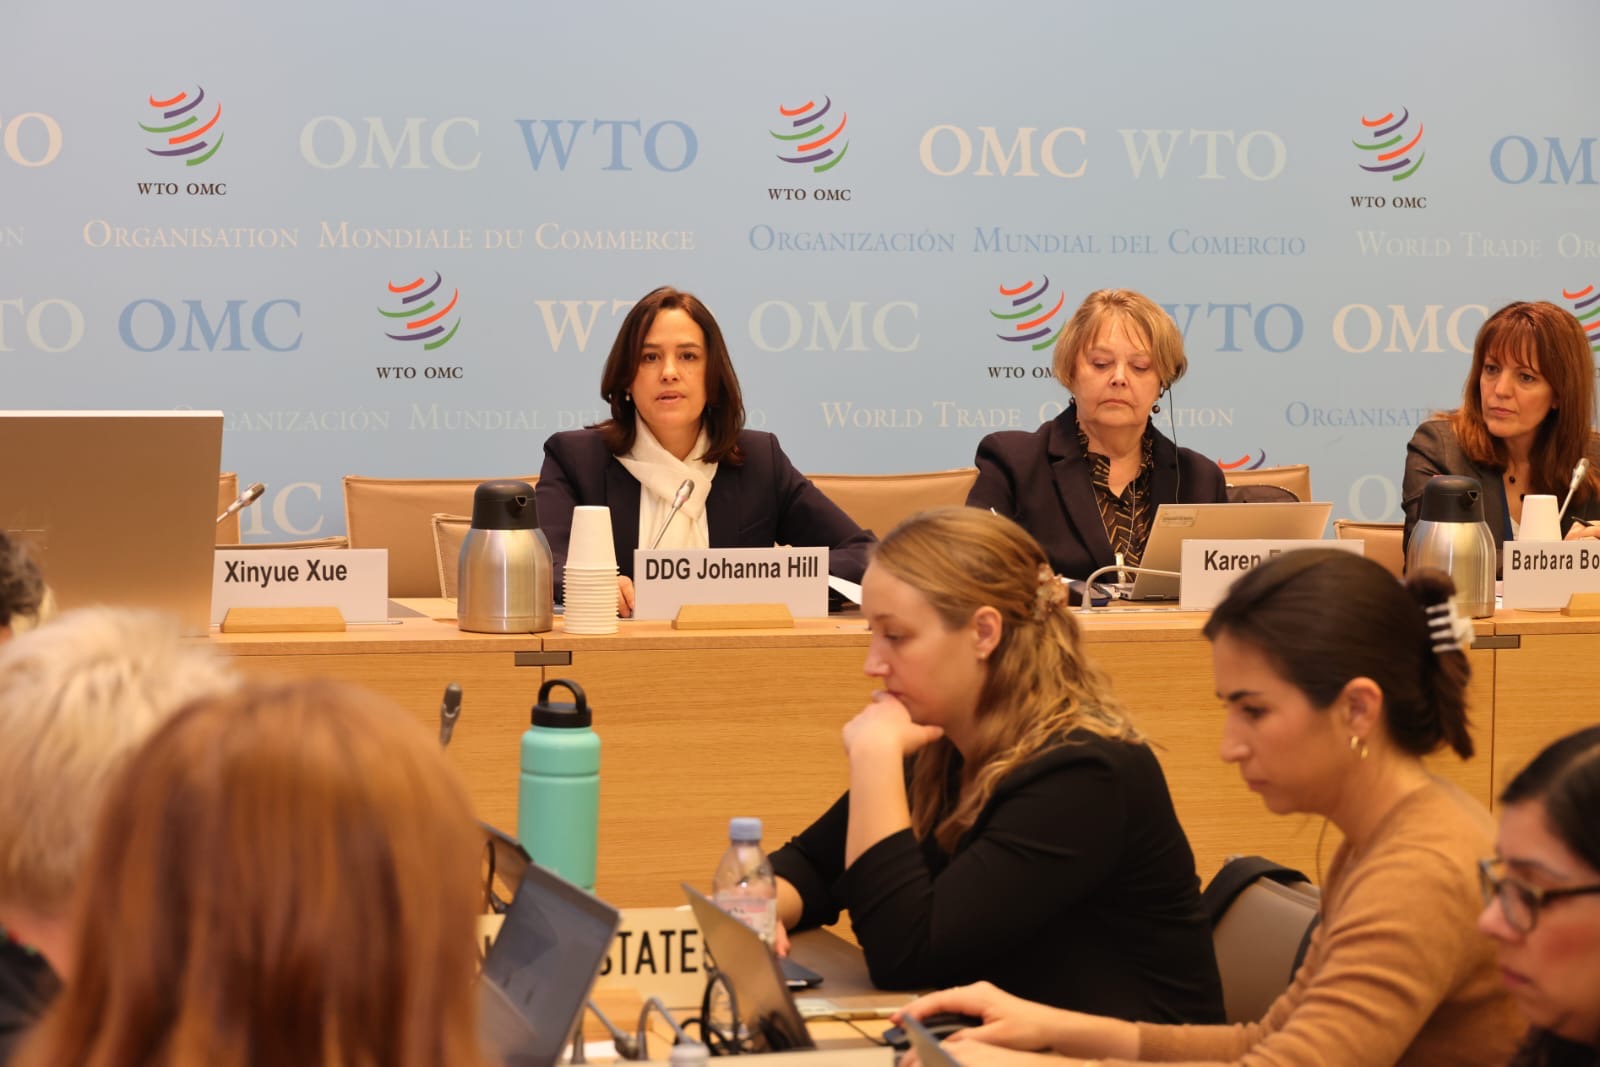 EU4PFM Public Procurement Expert participates in WTO workshop on the role of digital innovation in supporting trade and competition in public procurement